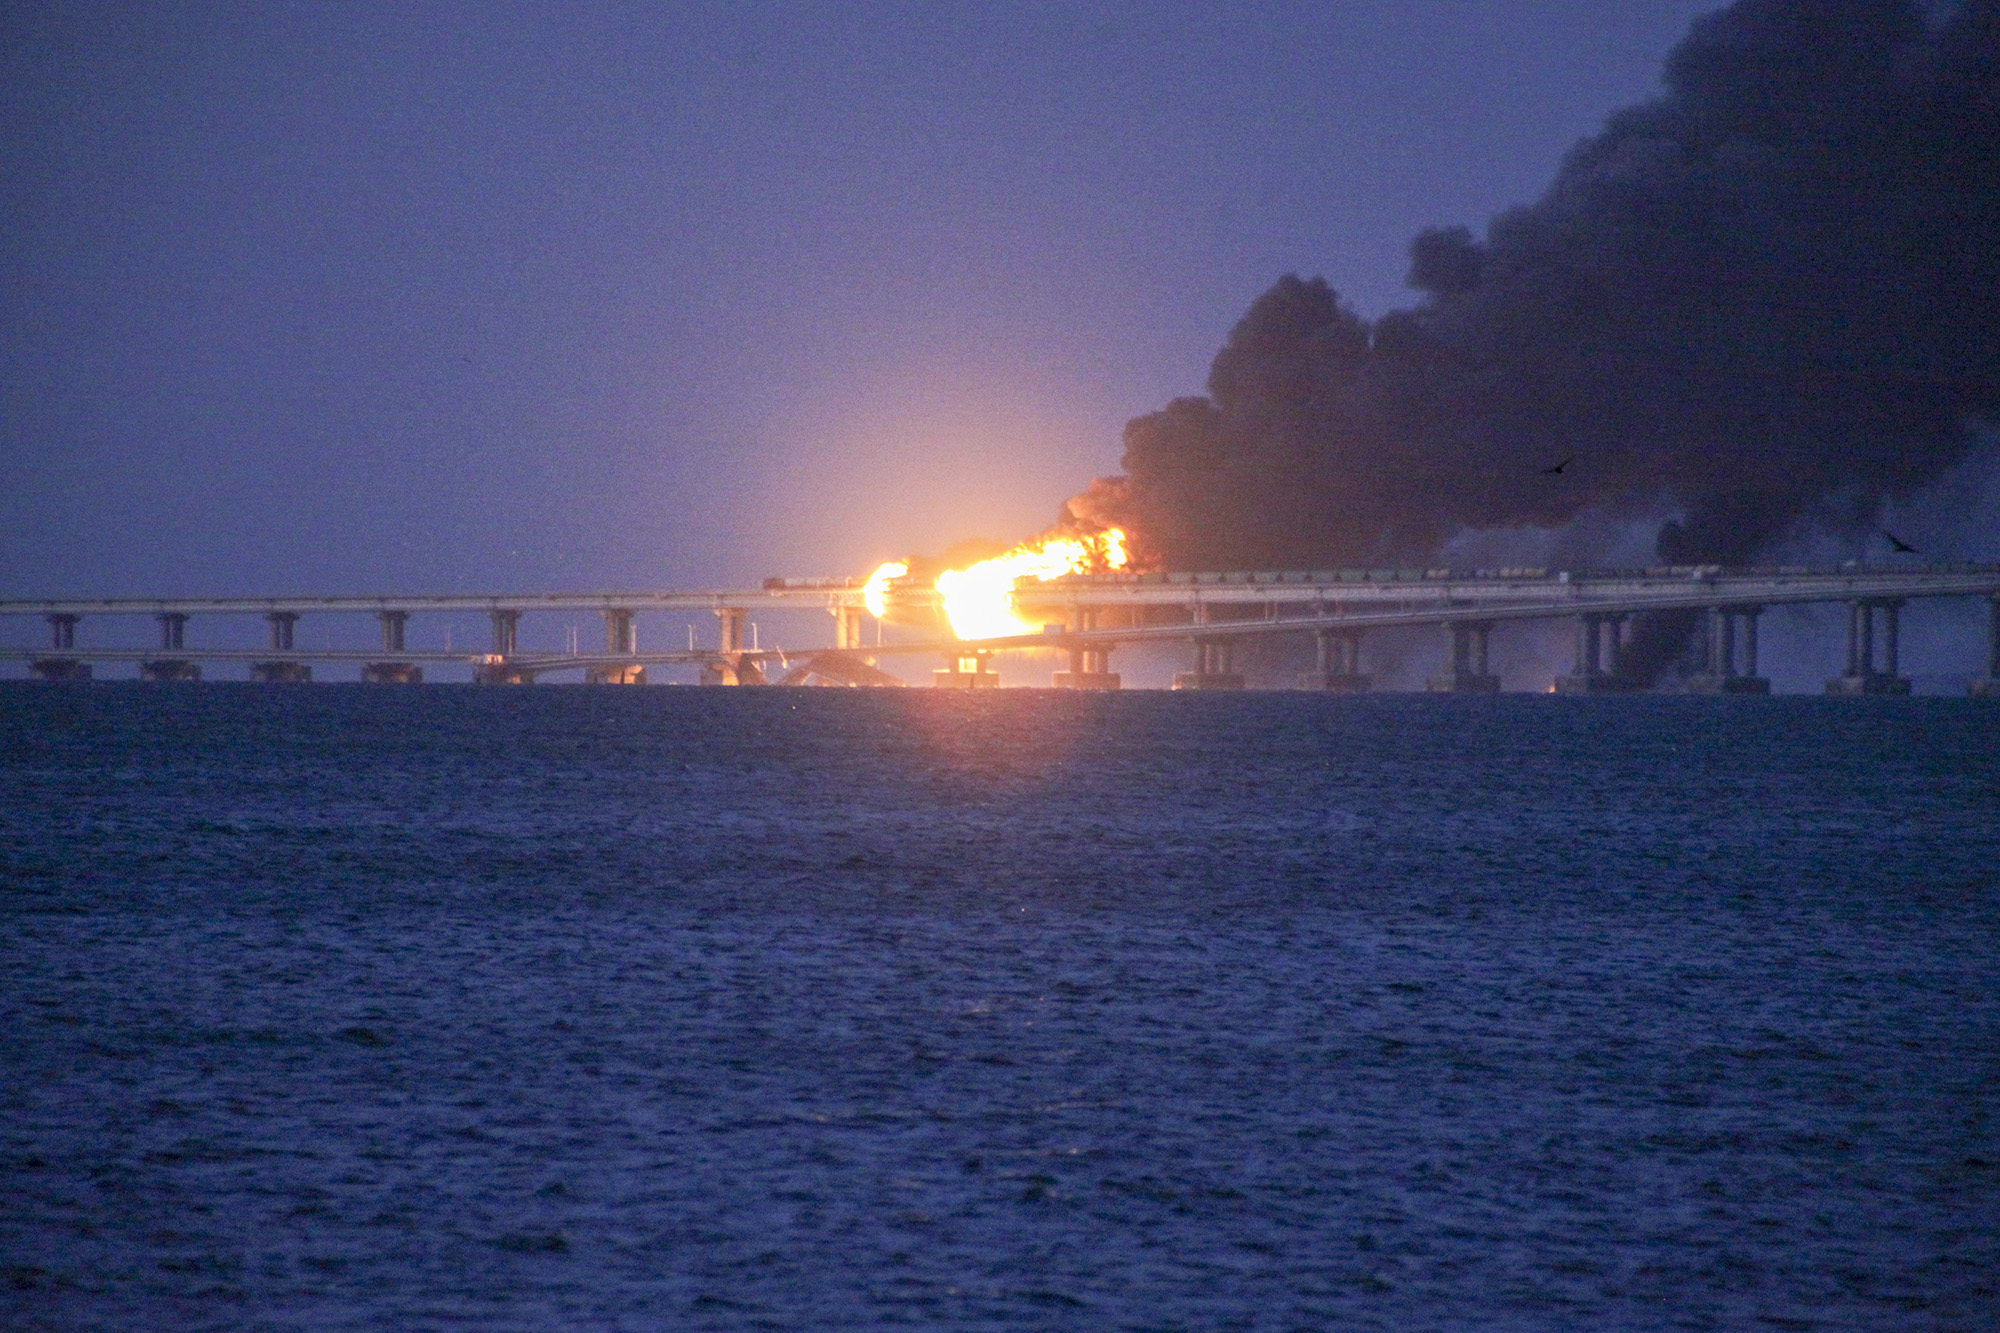 An explosion at the Kerch bridge in the Kerch Strait, Crimea, on October 8.